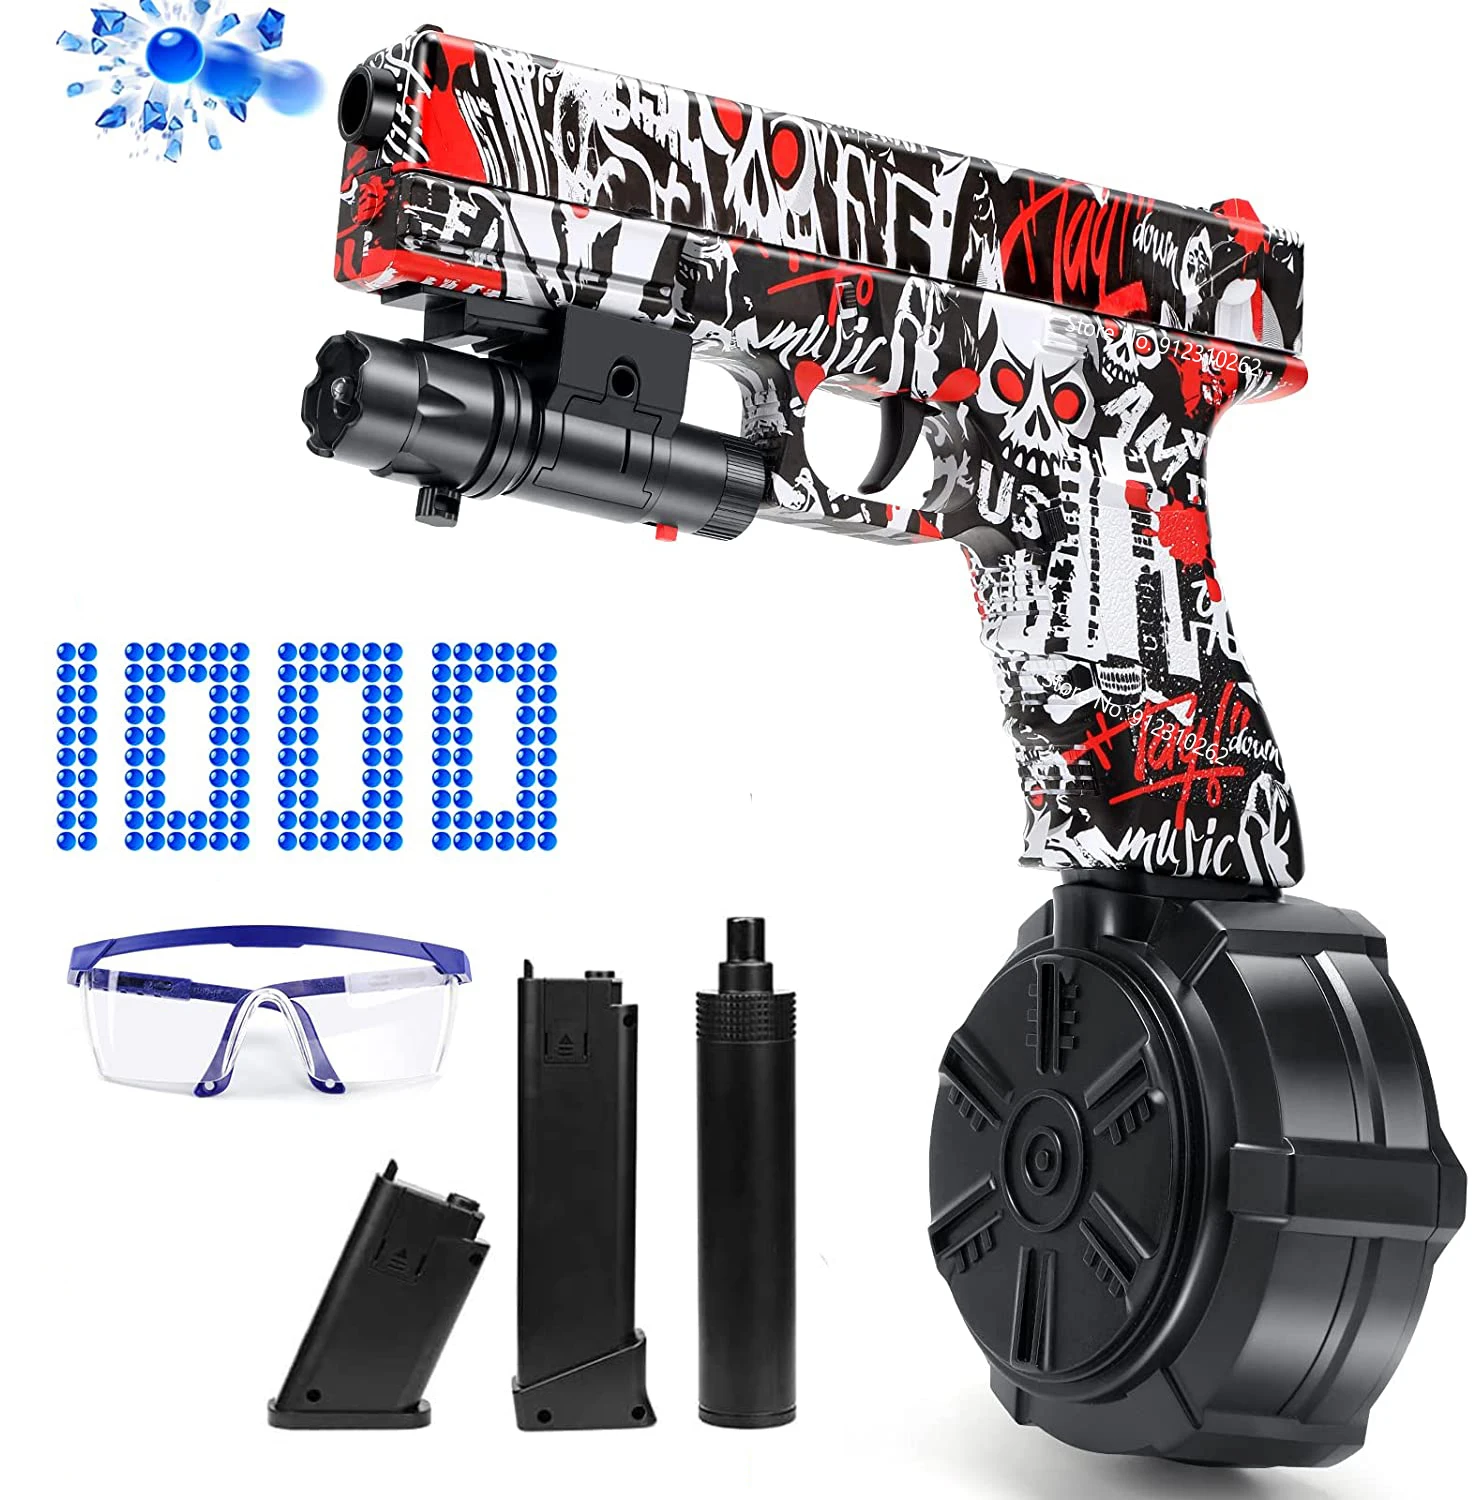 

2 in 1 Electric Manual X2 Pistol Airsoft Gel Ball Blaster Automatic Splatter Toy Gun Cs Game Paintball Weapon For Boys Gift